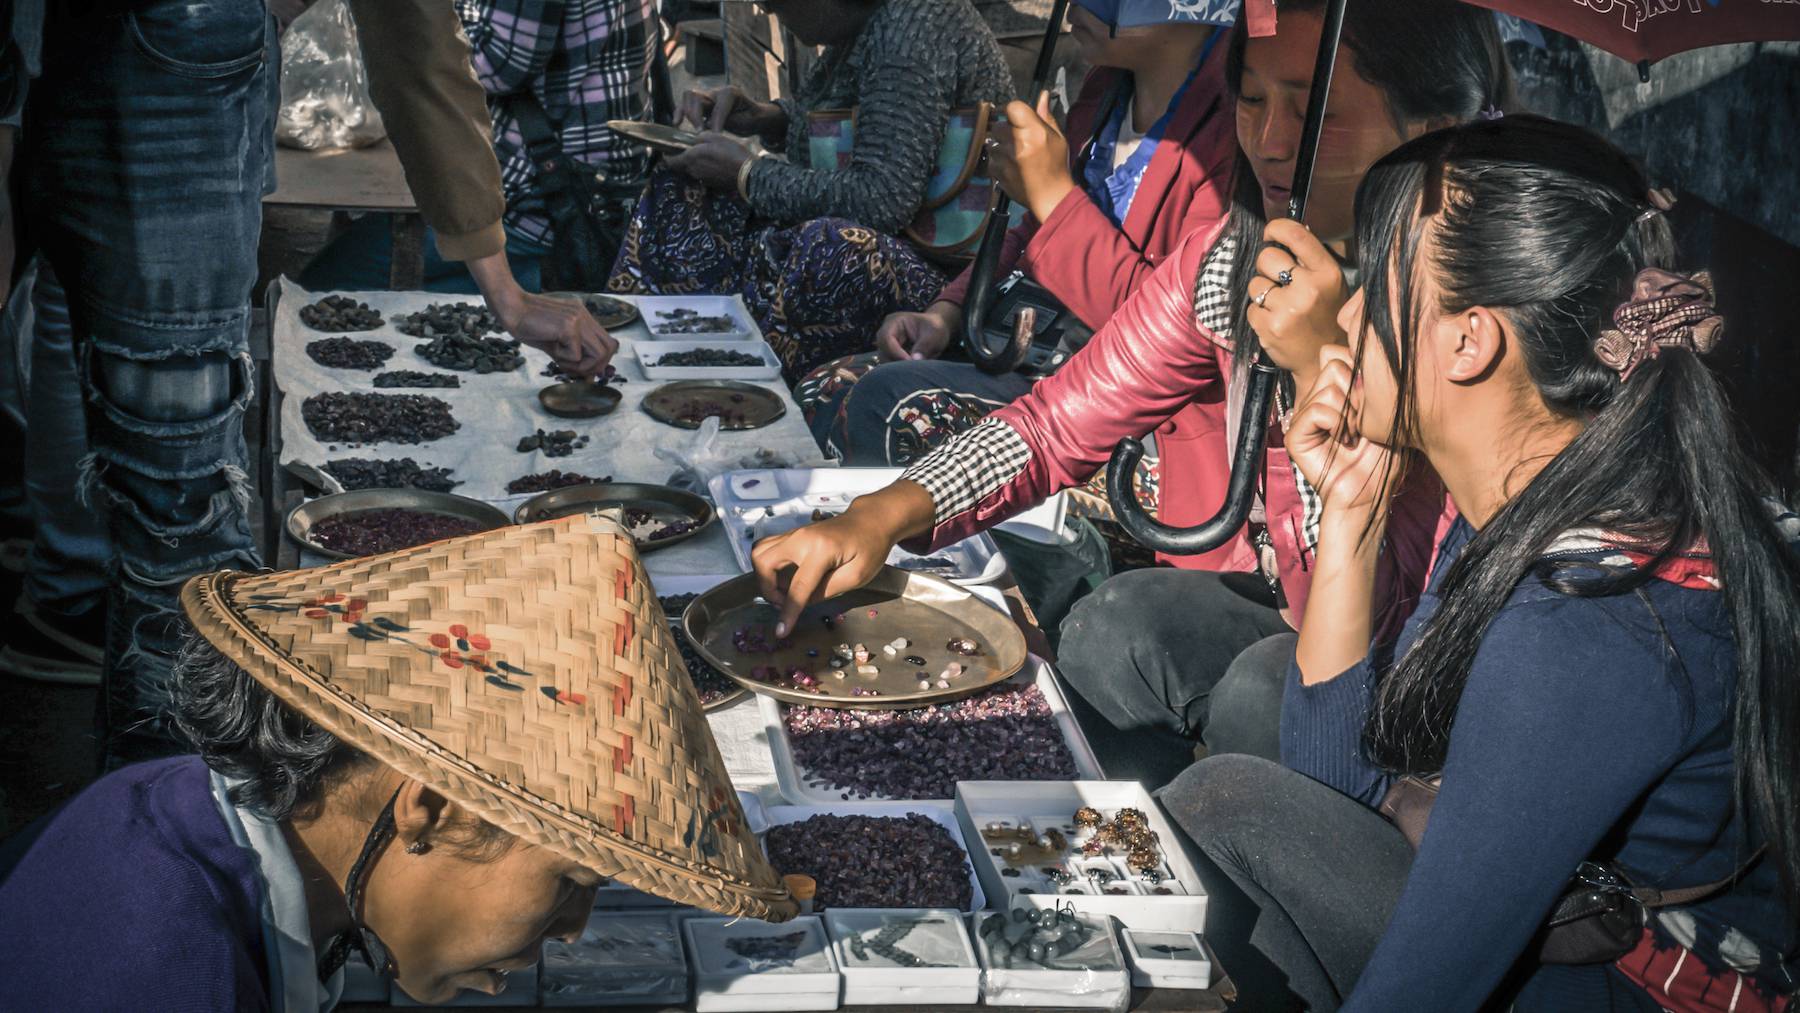 Gem traders at a market in Myanmar in 2015. The world's most prized rubies originate in the country, but the industry's links to the military have made them the subject of sanctions and controversy.